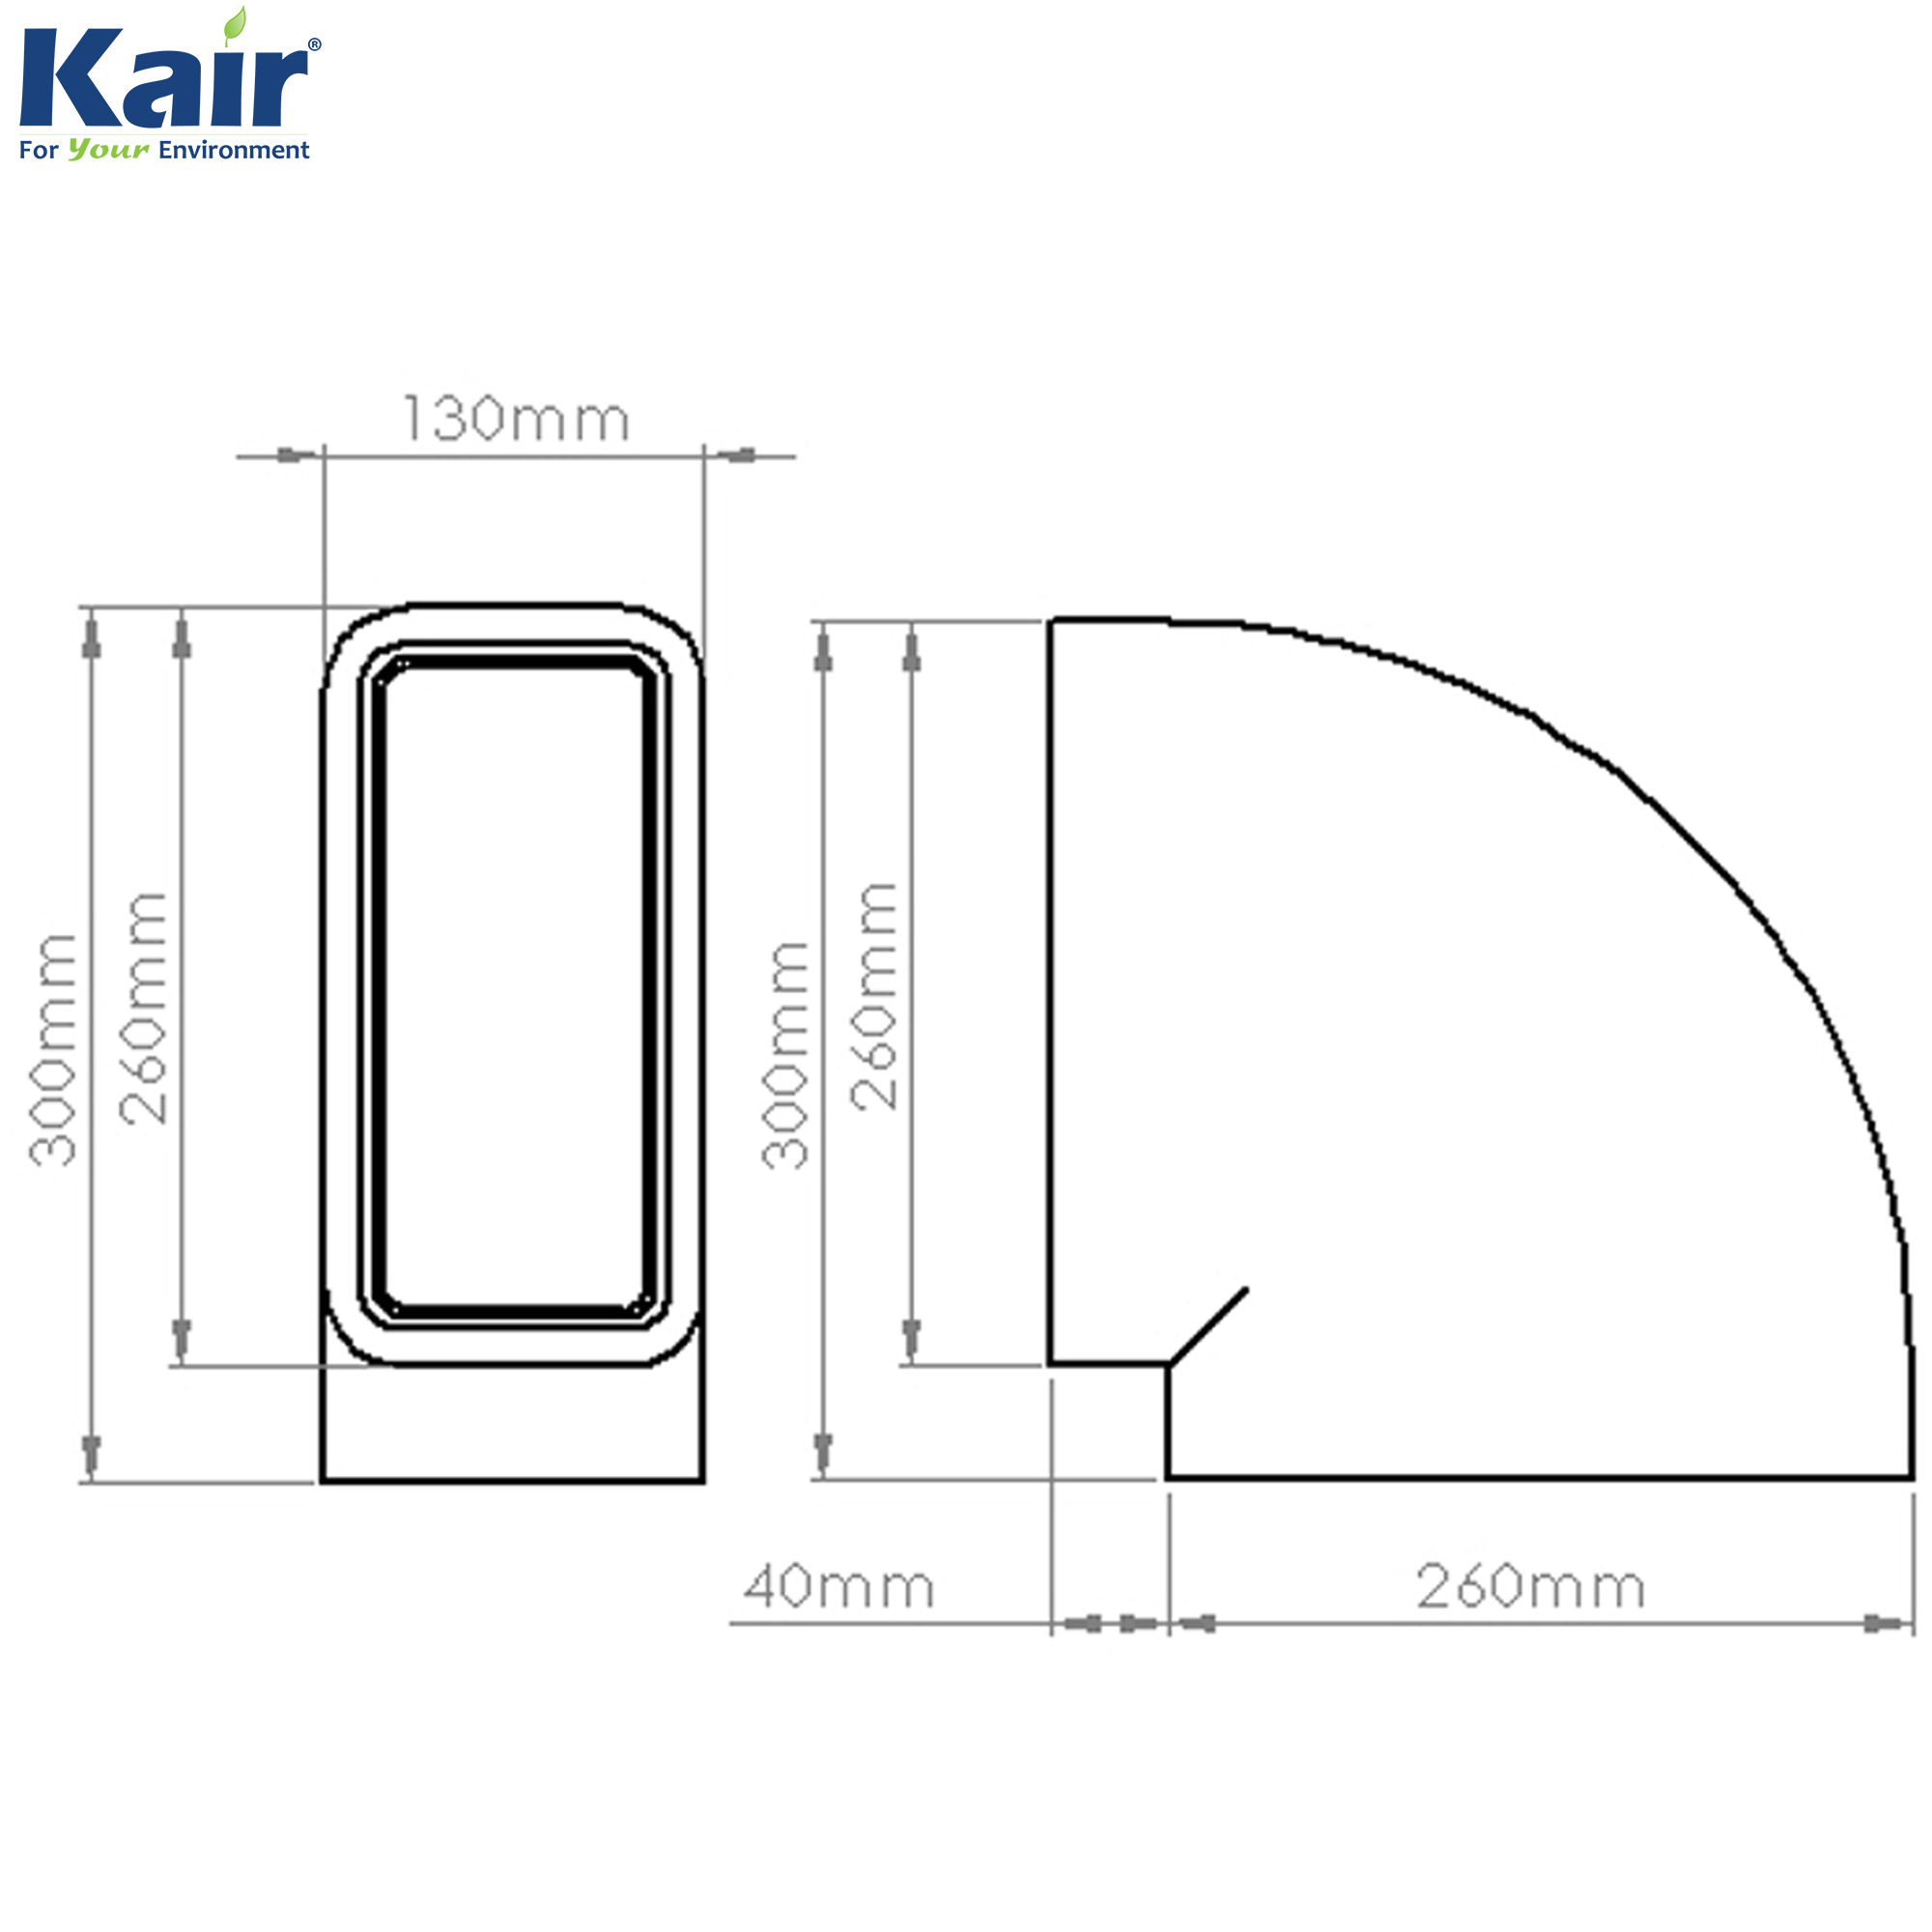 Box of 6 x Kair Self-Seal Thermal Ducting 220X90mm Horizontal 90 Degree Bends Complete With Female Click And Lock Fittings